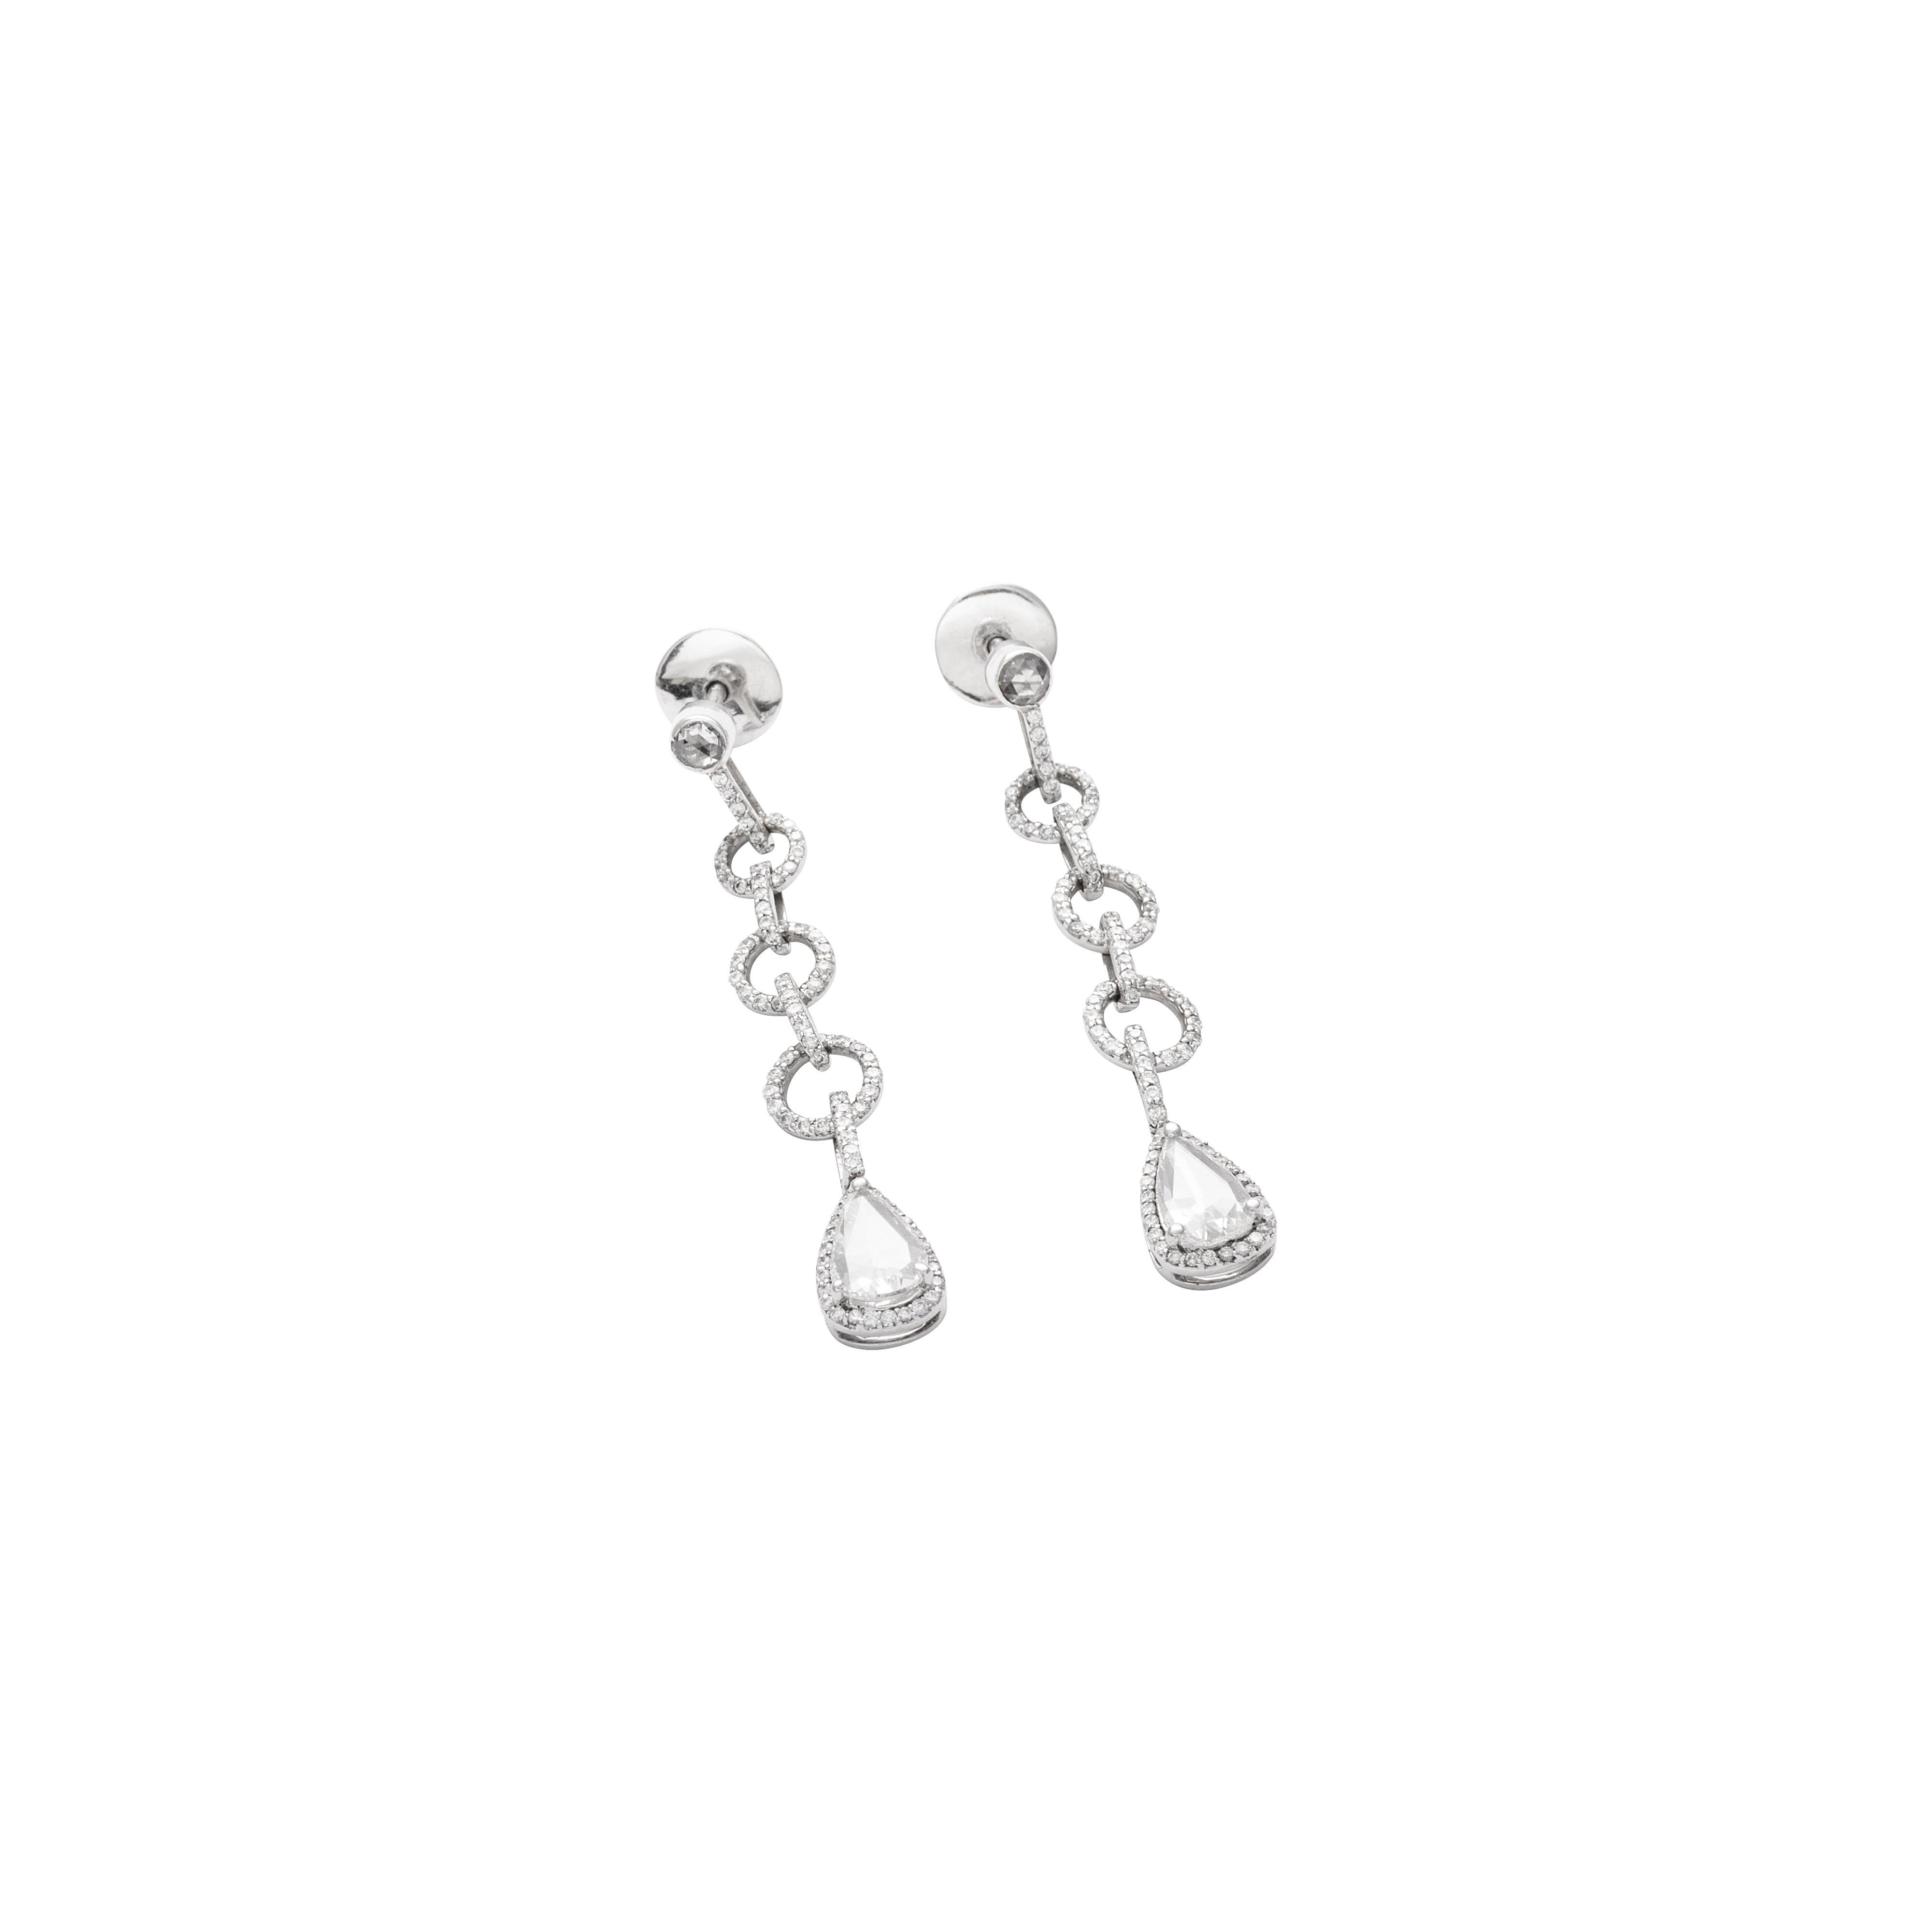 18 Karat White Gold Rosecut Diamond Earrings

Elegant & classy, these earrings set in 18 Karat white gold, studded with a mix of rosecut and full cut diamonds are perfect for evening wear.

18 Karat Gold - 6.906gms
Diamond - 2.22cts